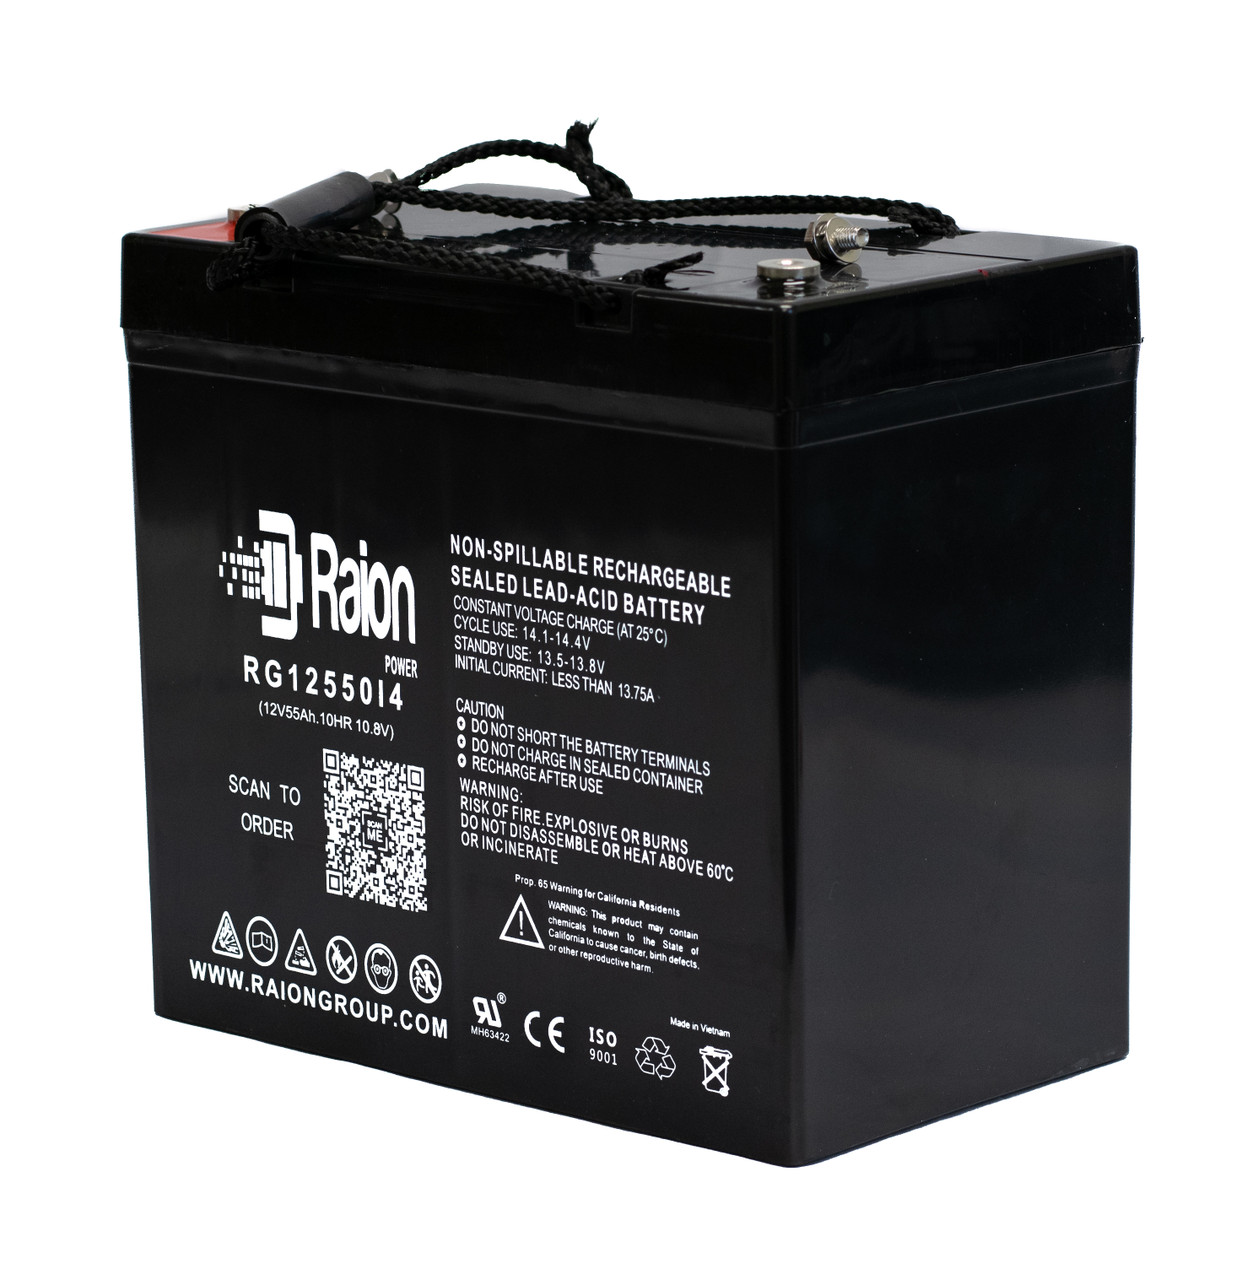 Raion Power Replacement 12V 55Ah Battery for Telong TL12550D - 1 Pack